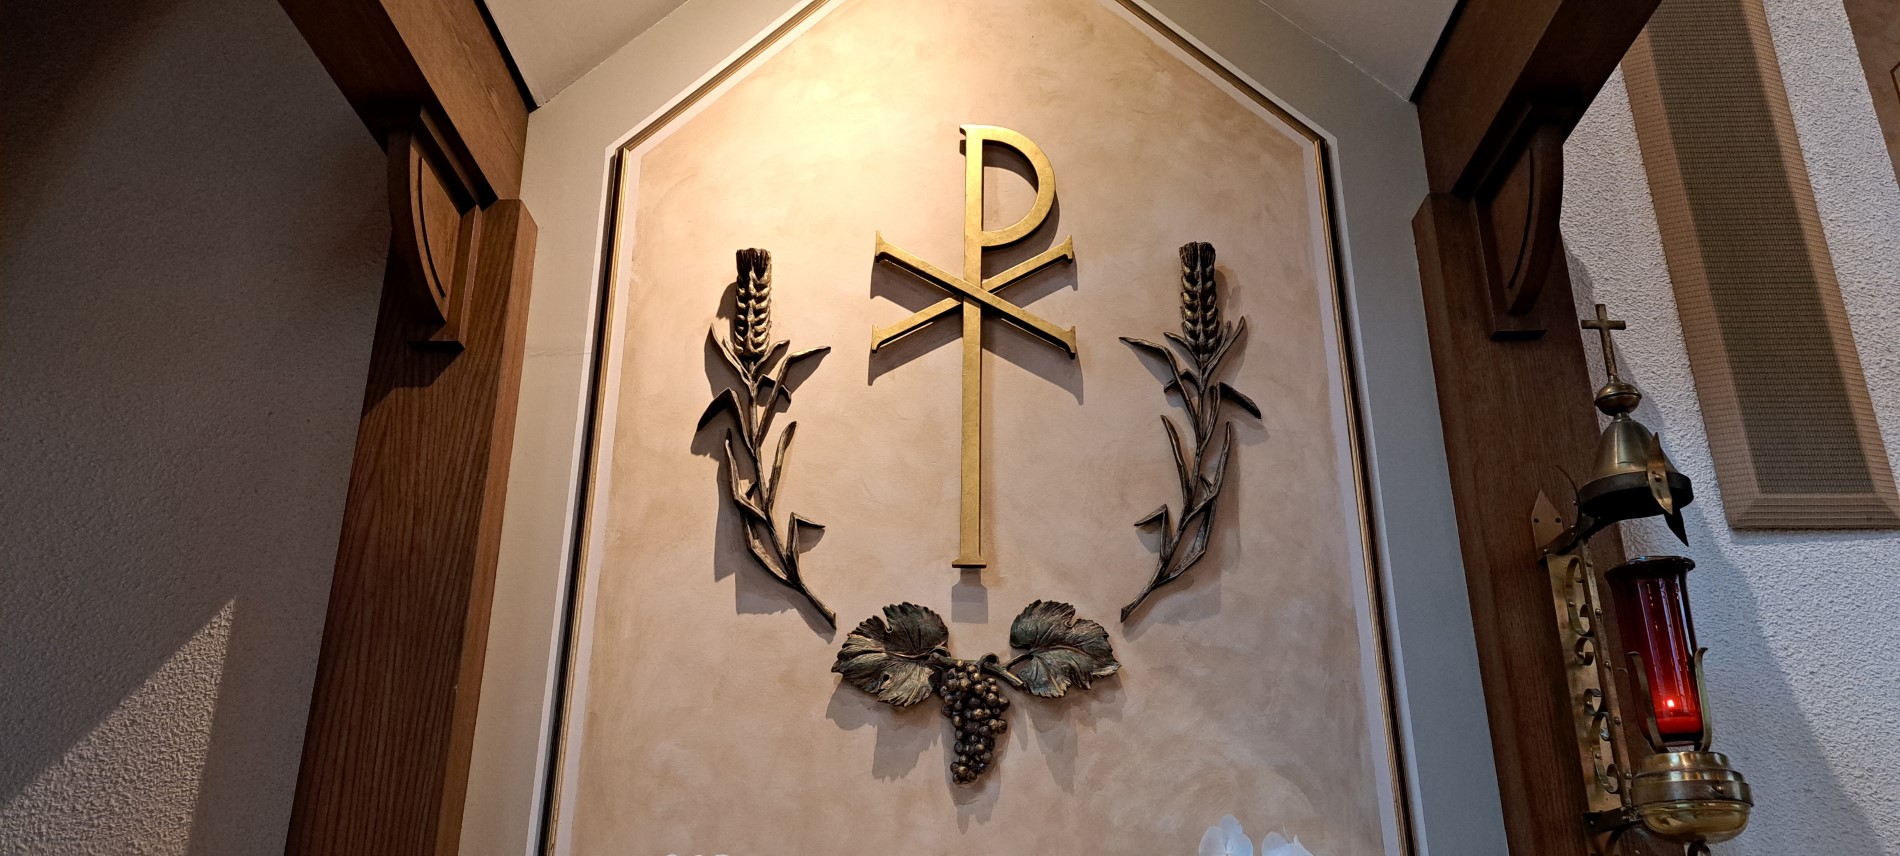 Picture of Chi Rho symbol above the tabernacle